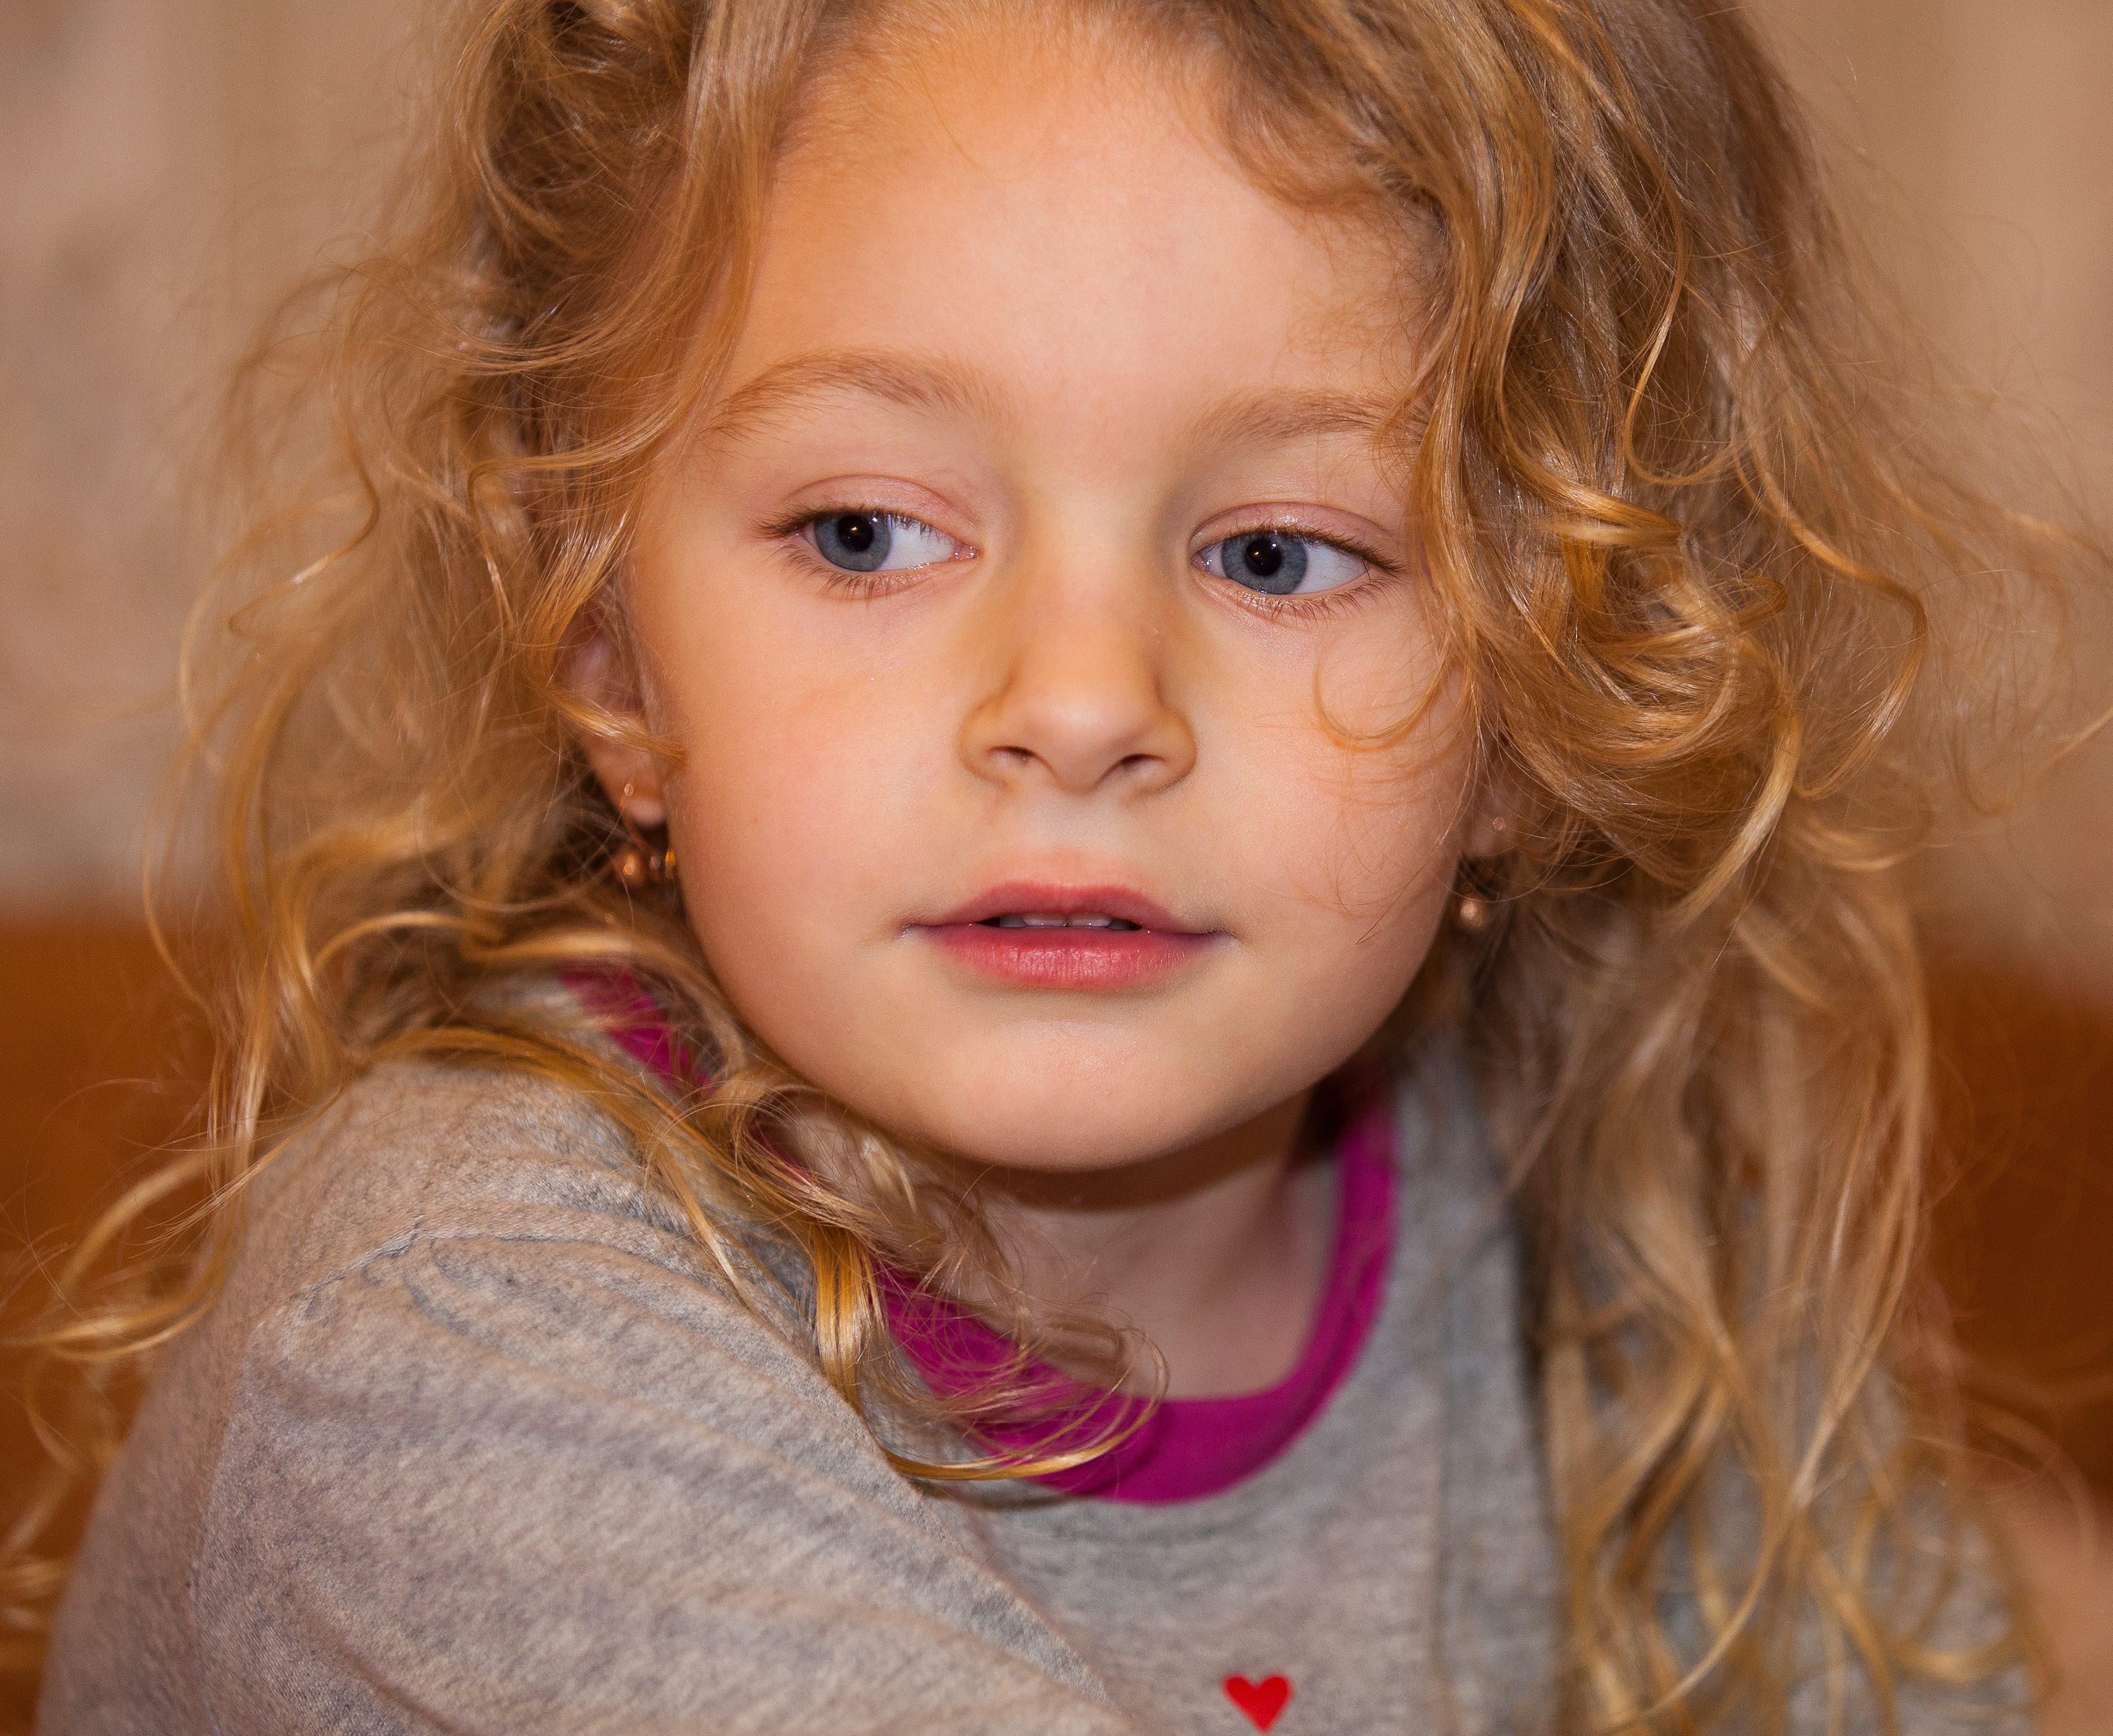 a cute blond child girl photographed in January 2014, photo 4 out of 4